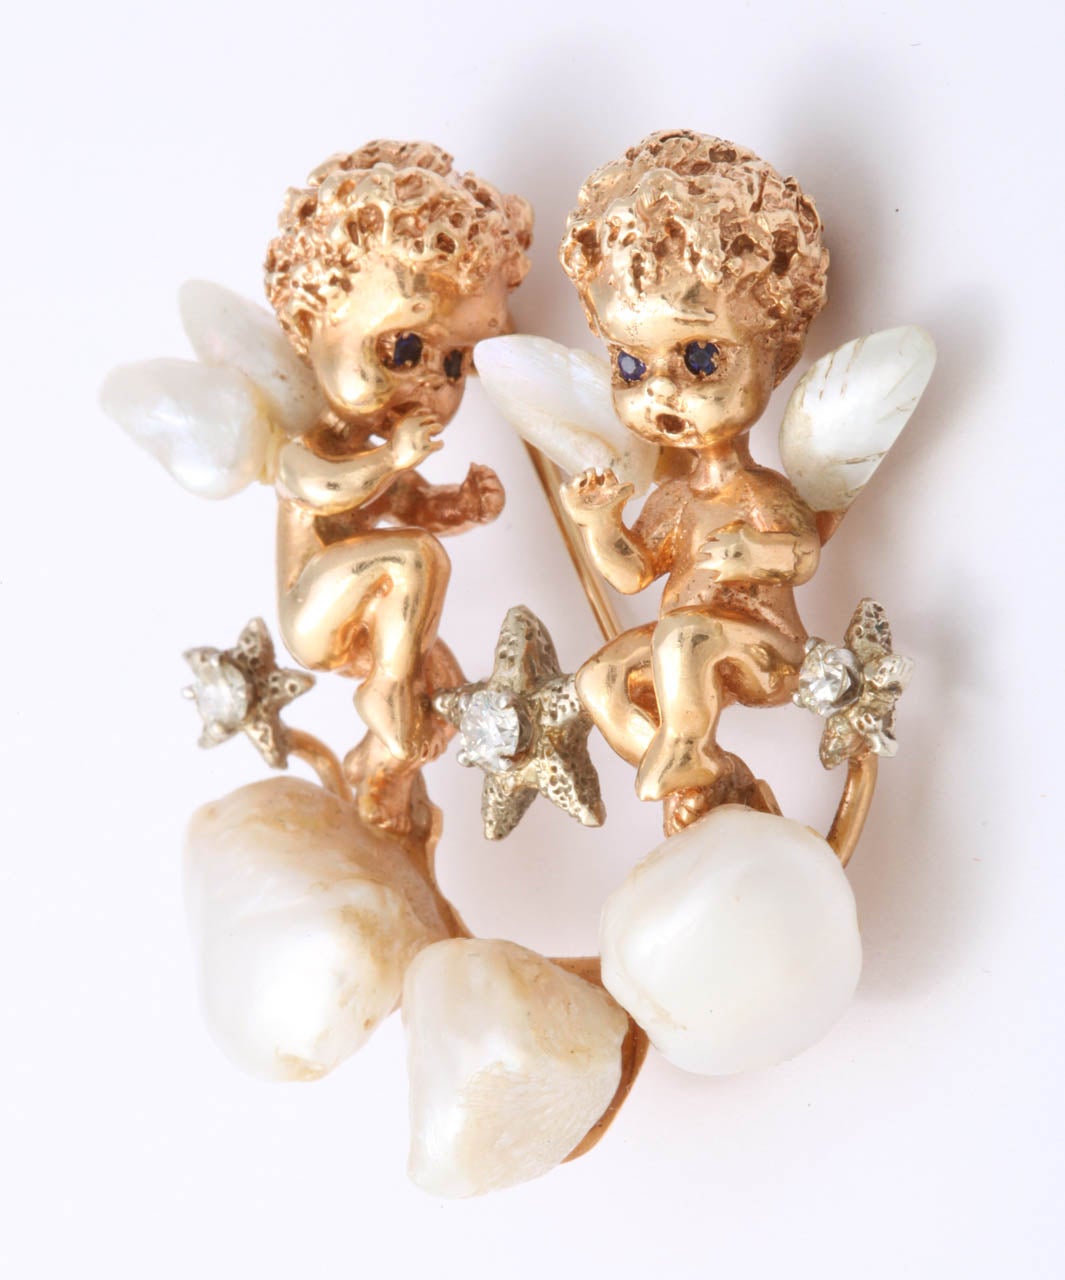 Pair of 14kt Yellow Gold Cherubs with Mississippi Mud Pearl Wings floating on a Pearl Cloud amongst white gold & Diamond Stars.  Signed Ruser in script.